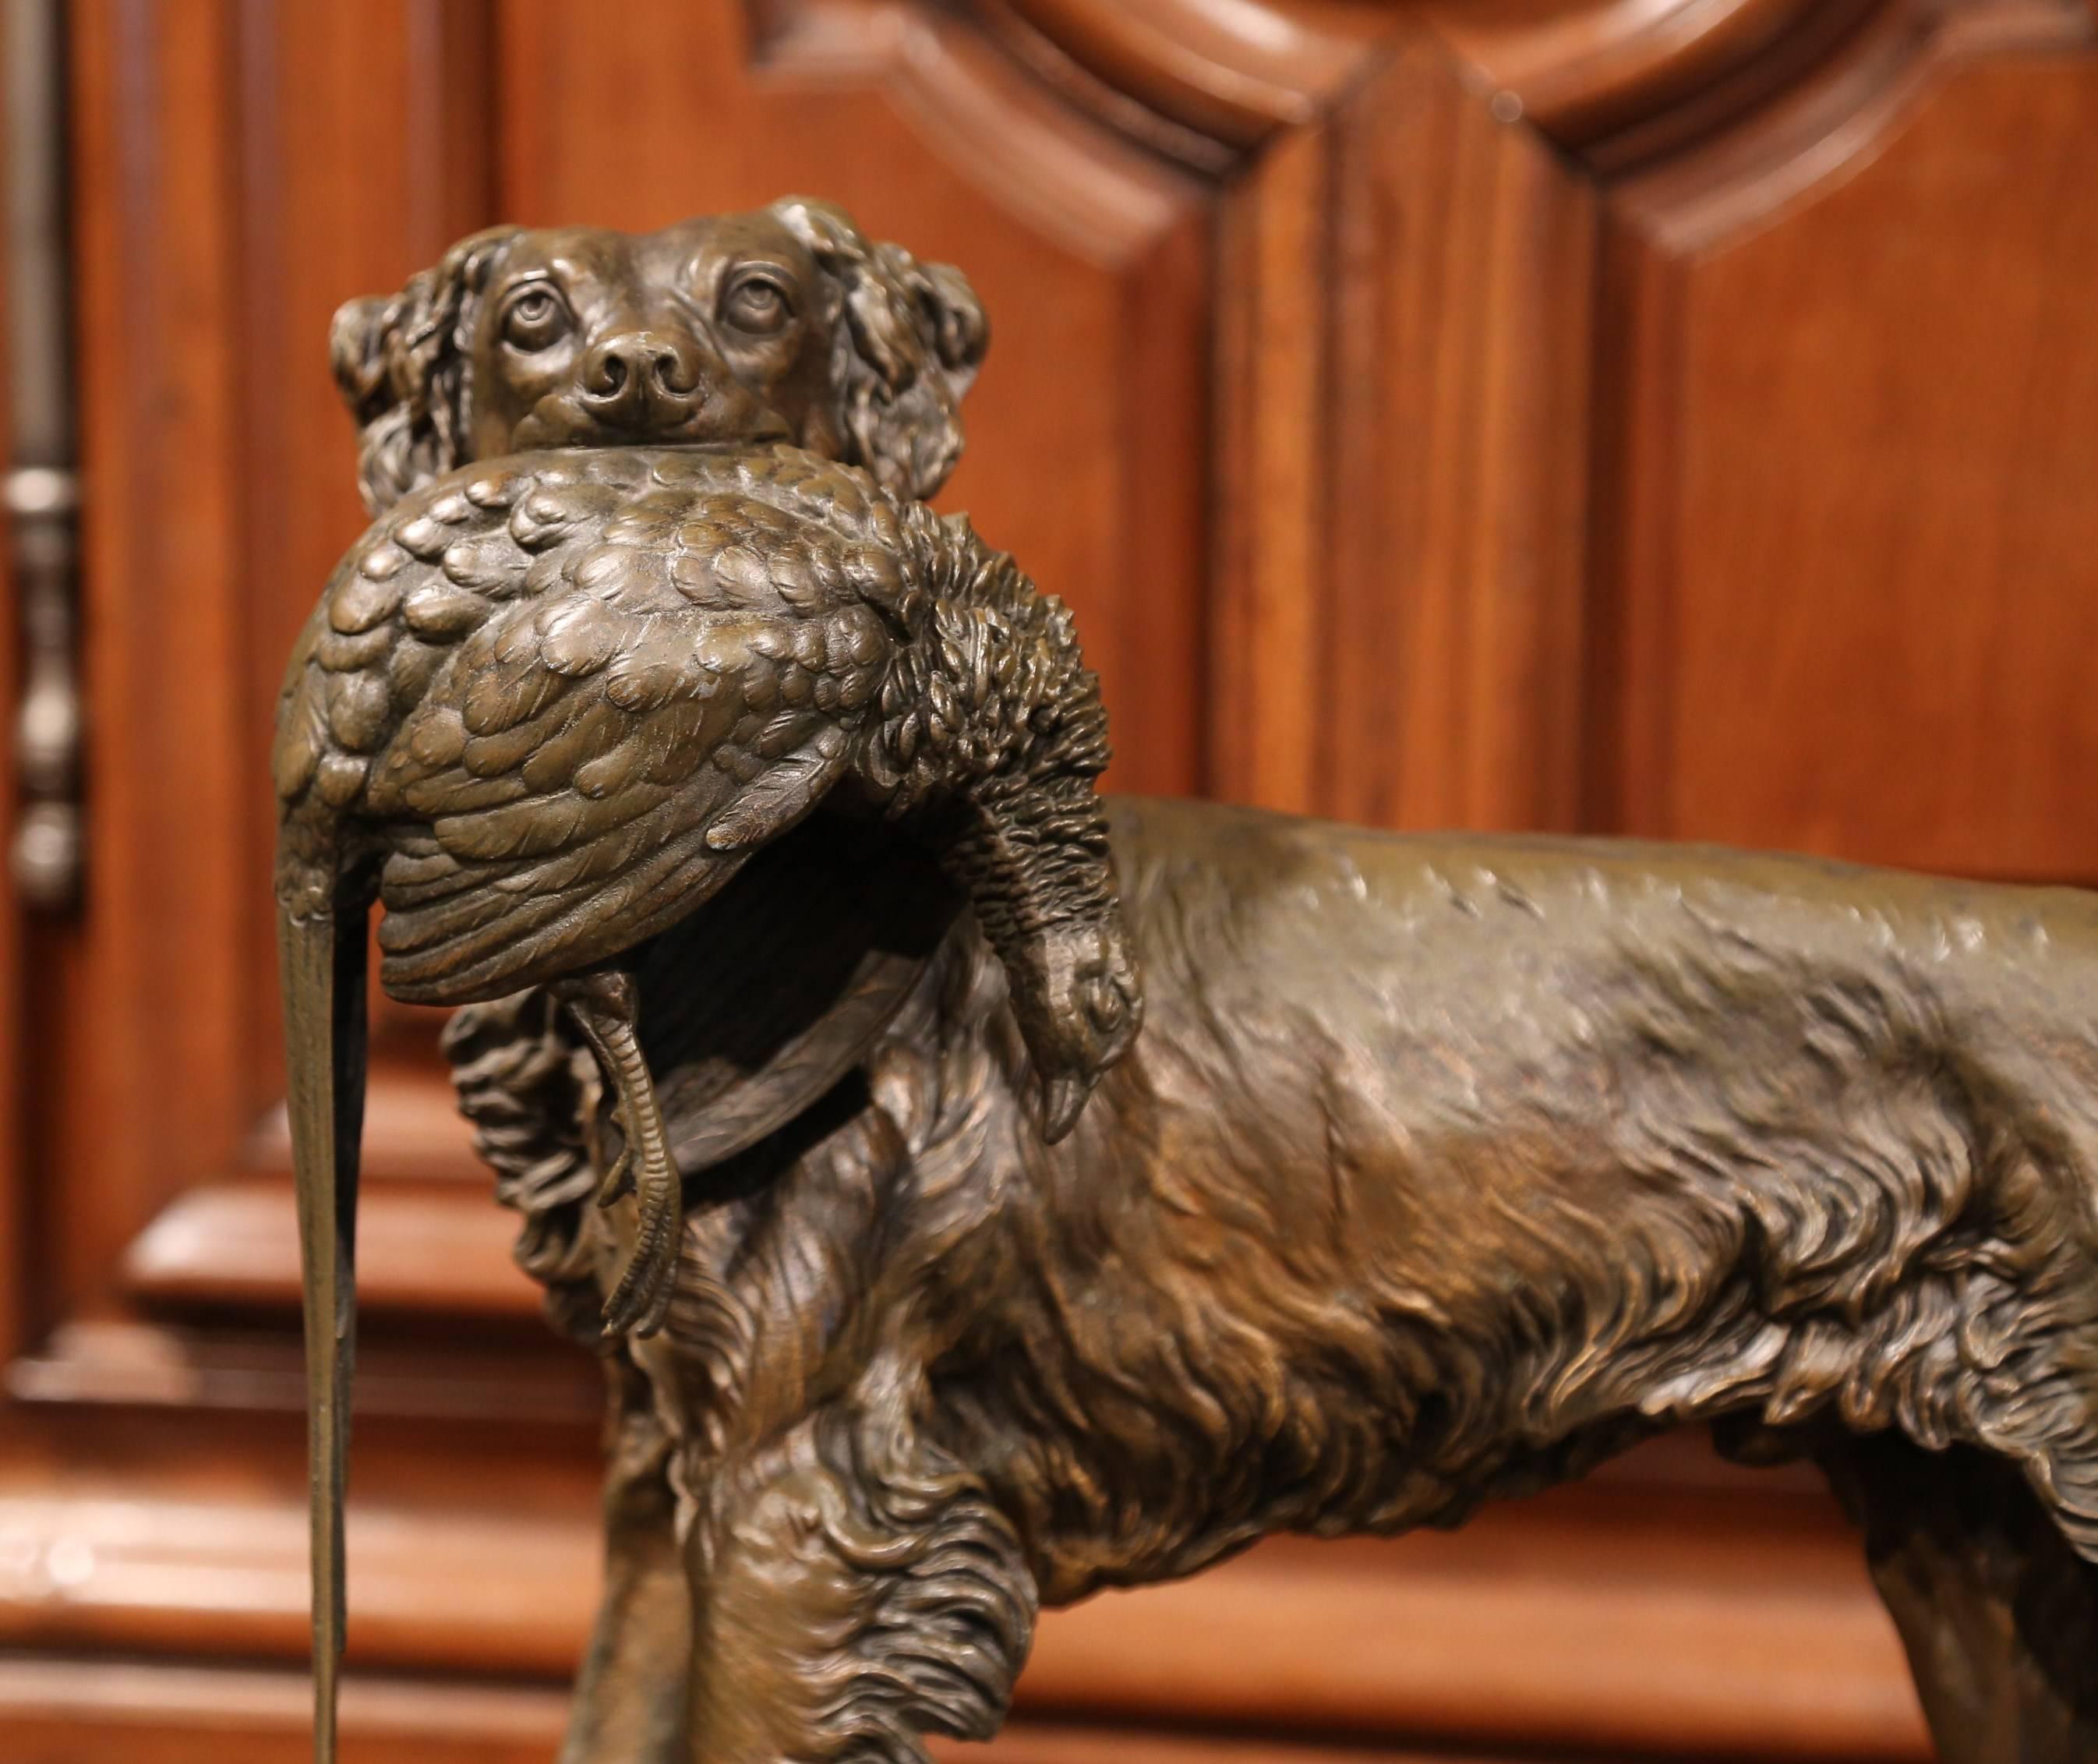 This antique metal dog and bird sculpture was created in France, circa 1870. The sculpture is highly detailed and depicts a hunting setter holding a pheasant in his mouth. The piece has a wonderful, aged patina and is in great condition. The